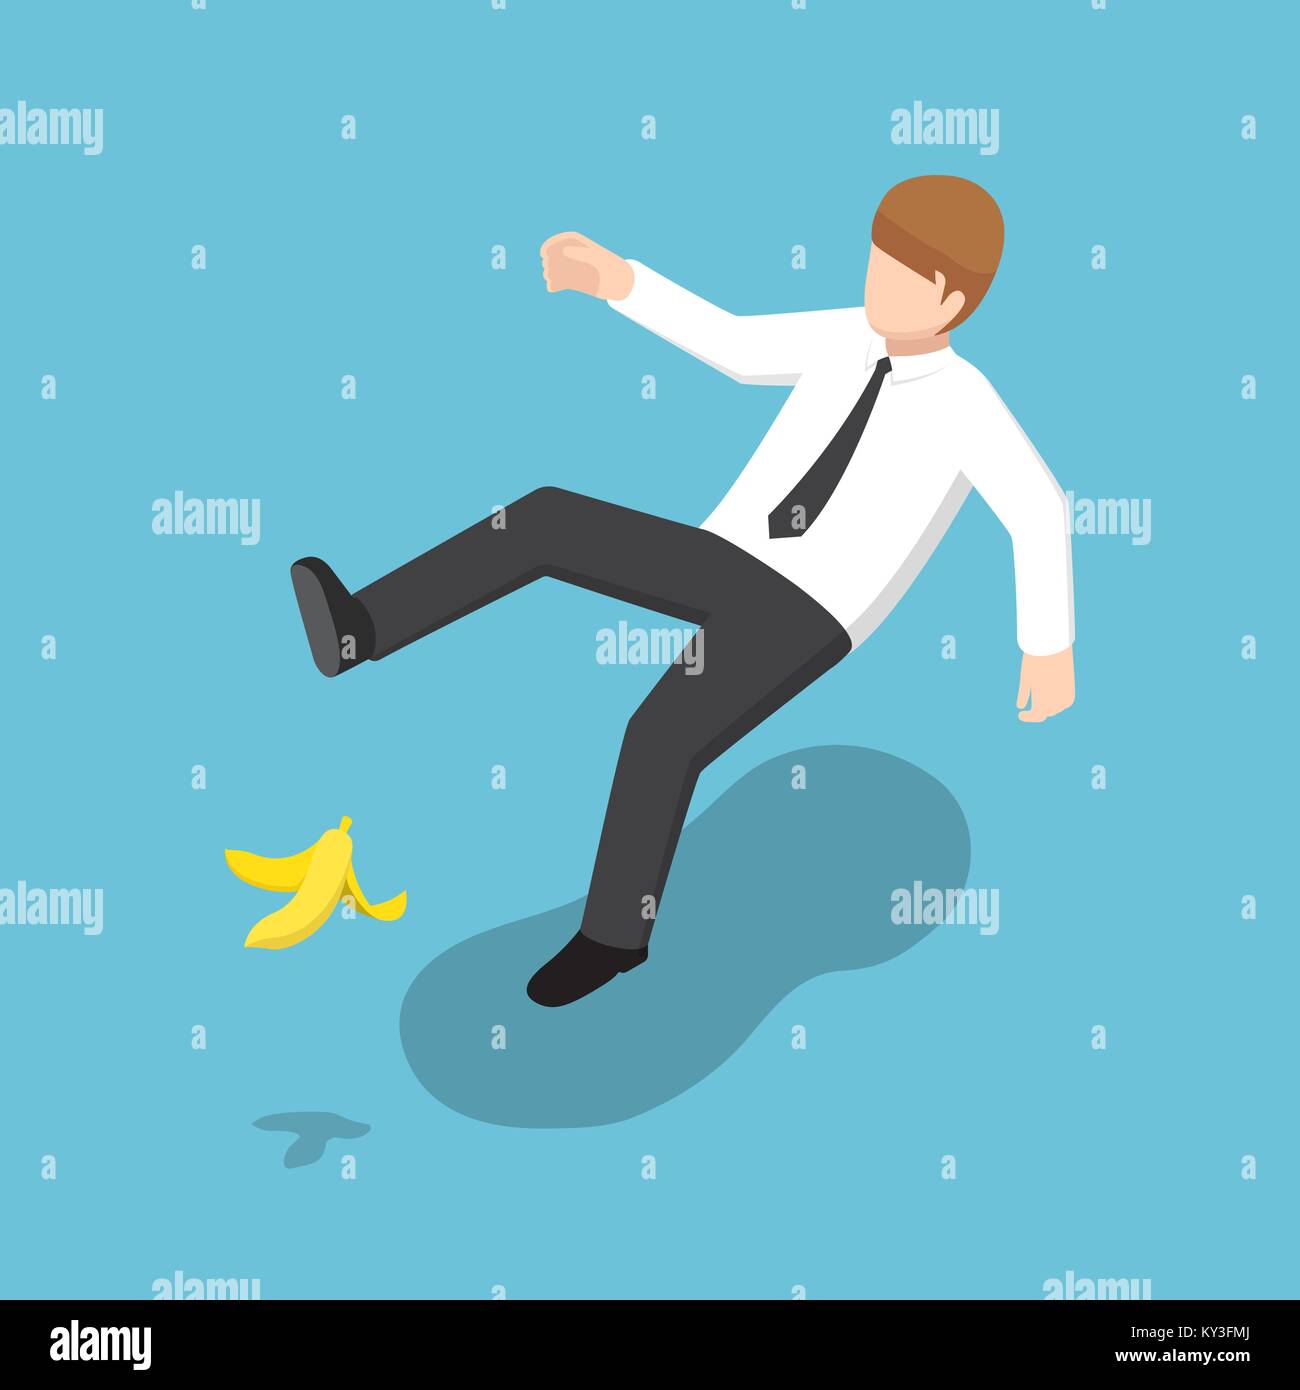 Flat 3d isometric businessman slipped on a banana peel. Business accident concept. Stock Vector